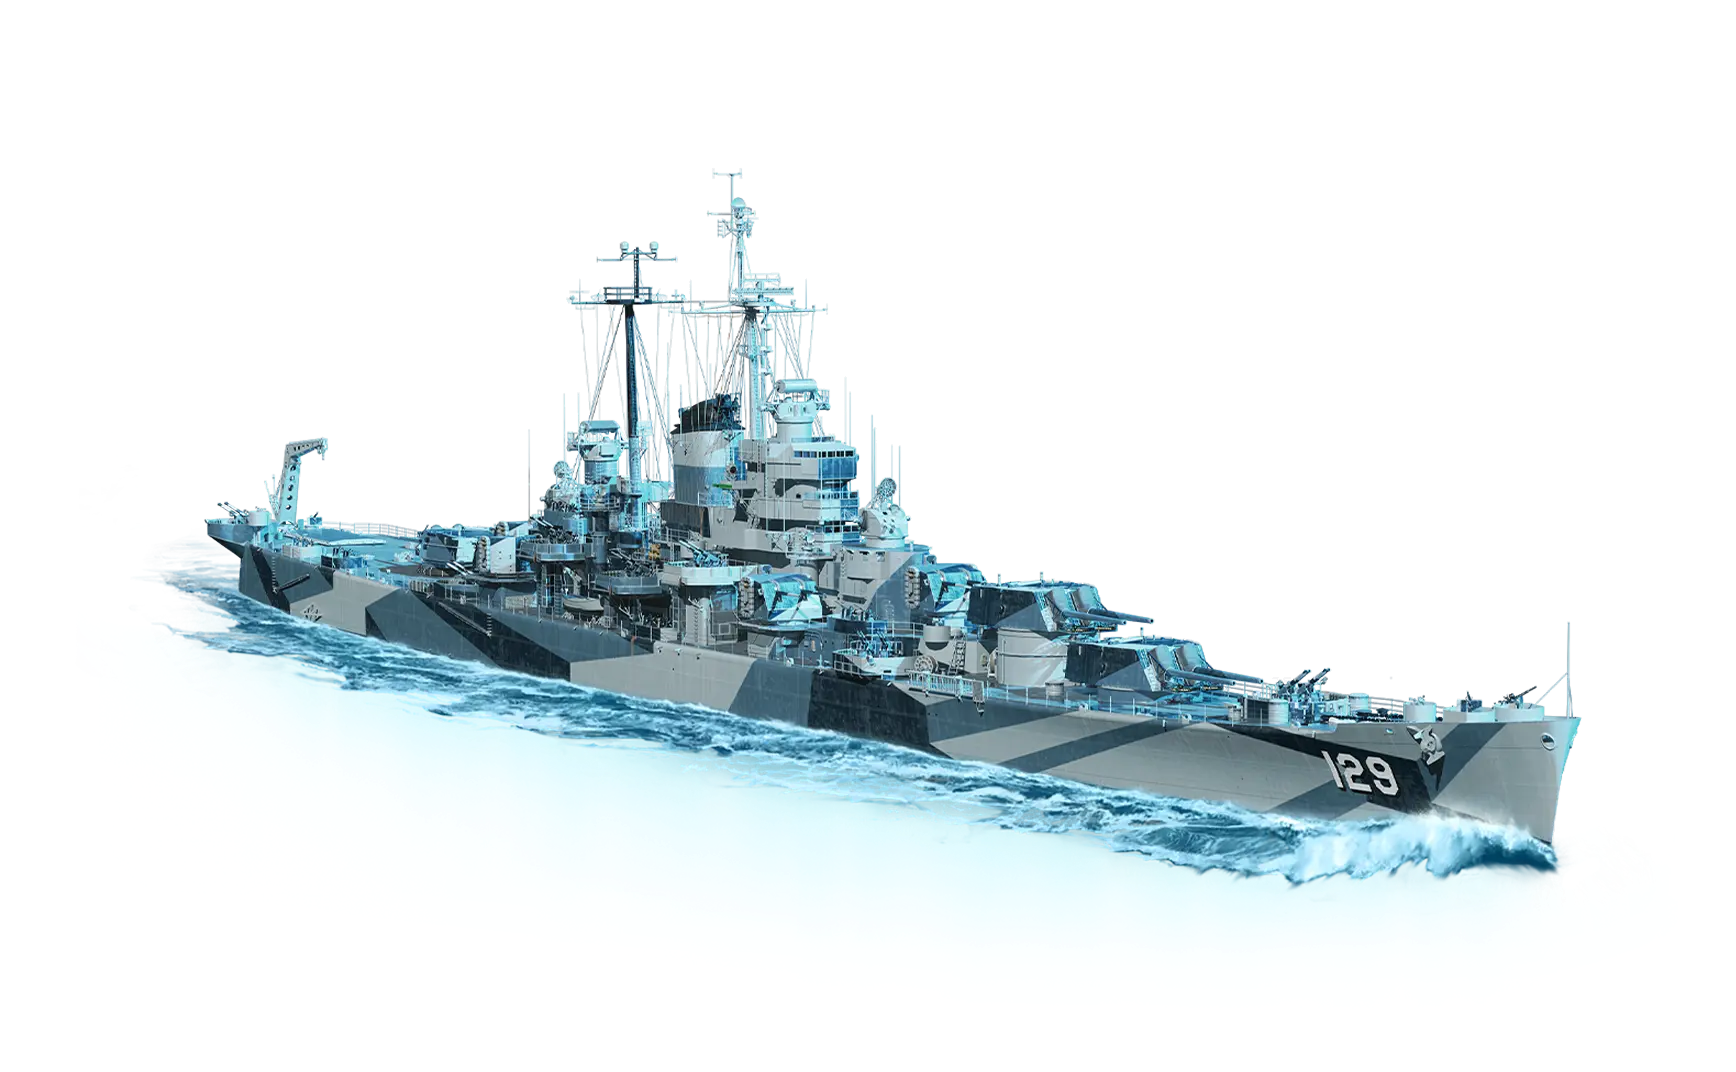 Tulsa from World Of Warships: Legends